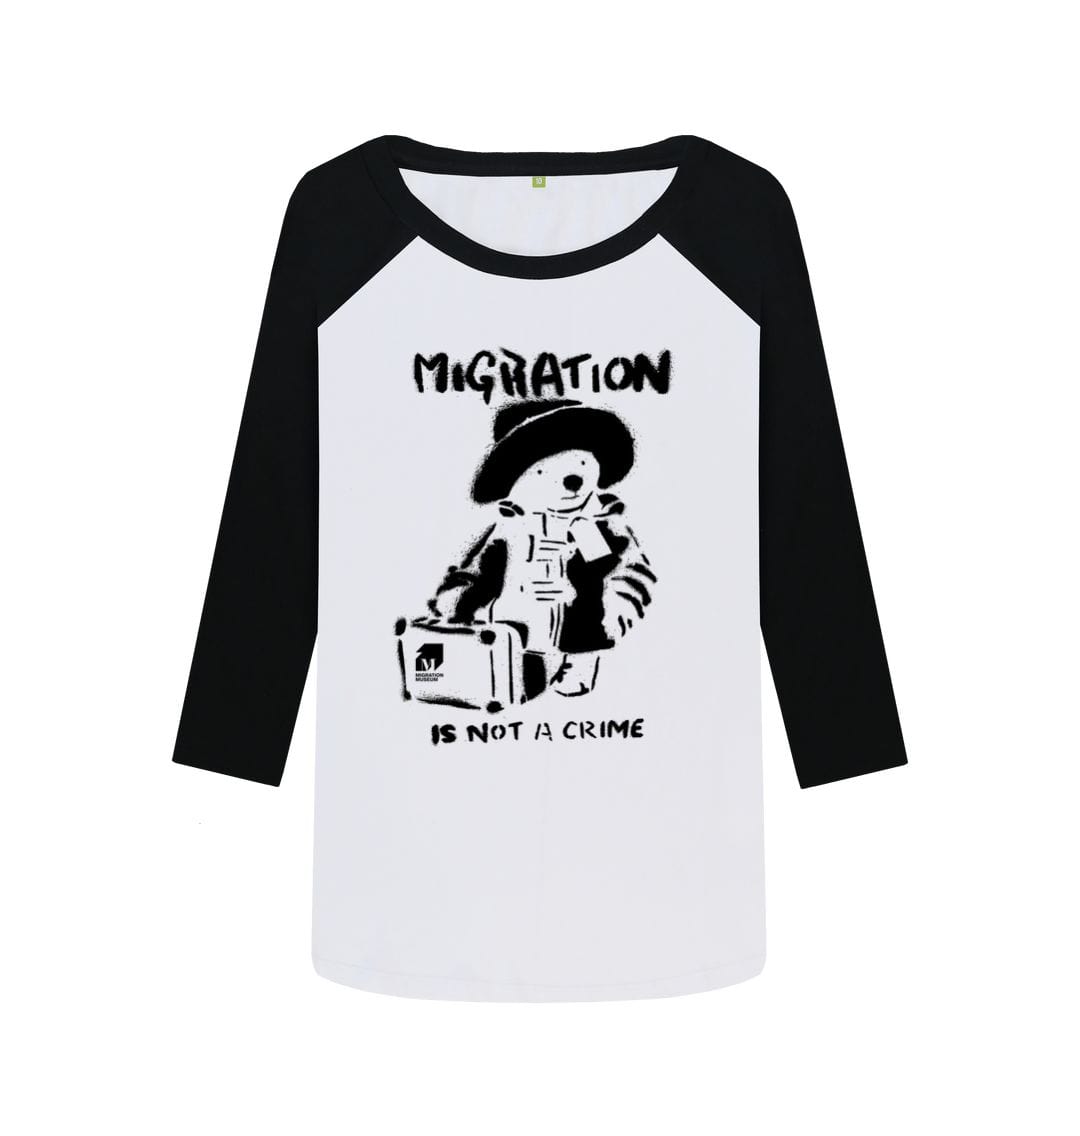 Black-White Migration Is Not A Crime Women's Baseball Top